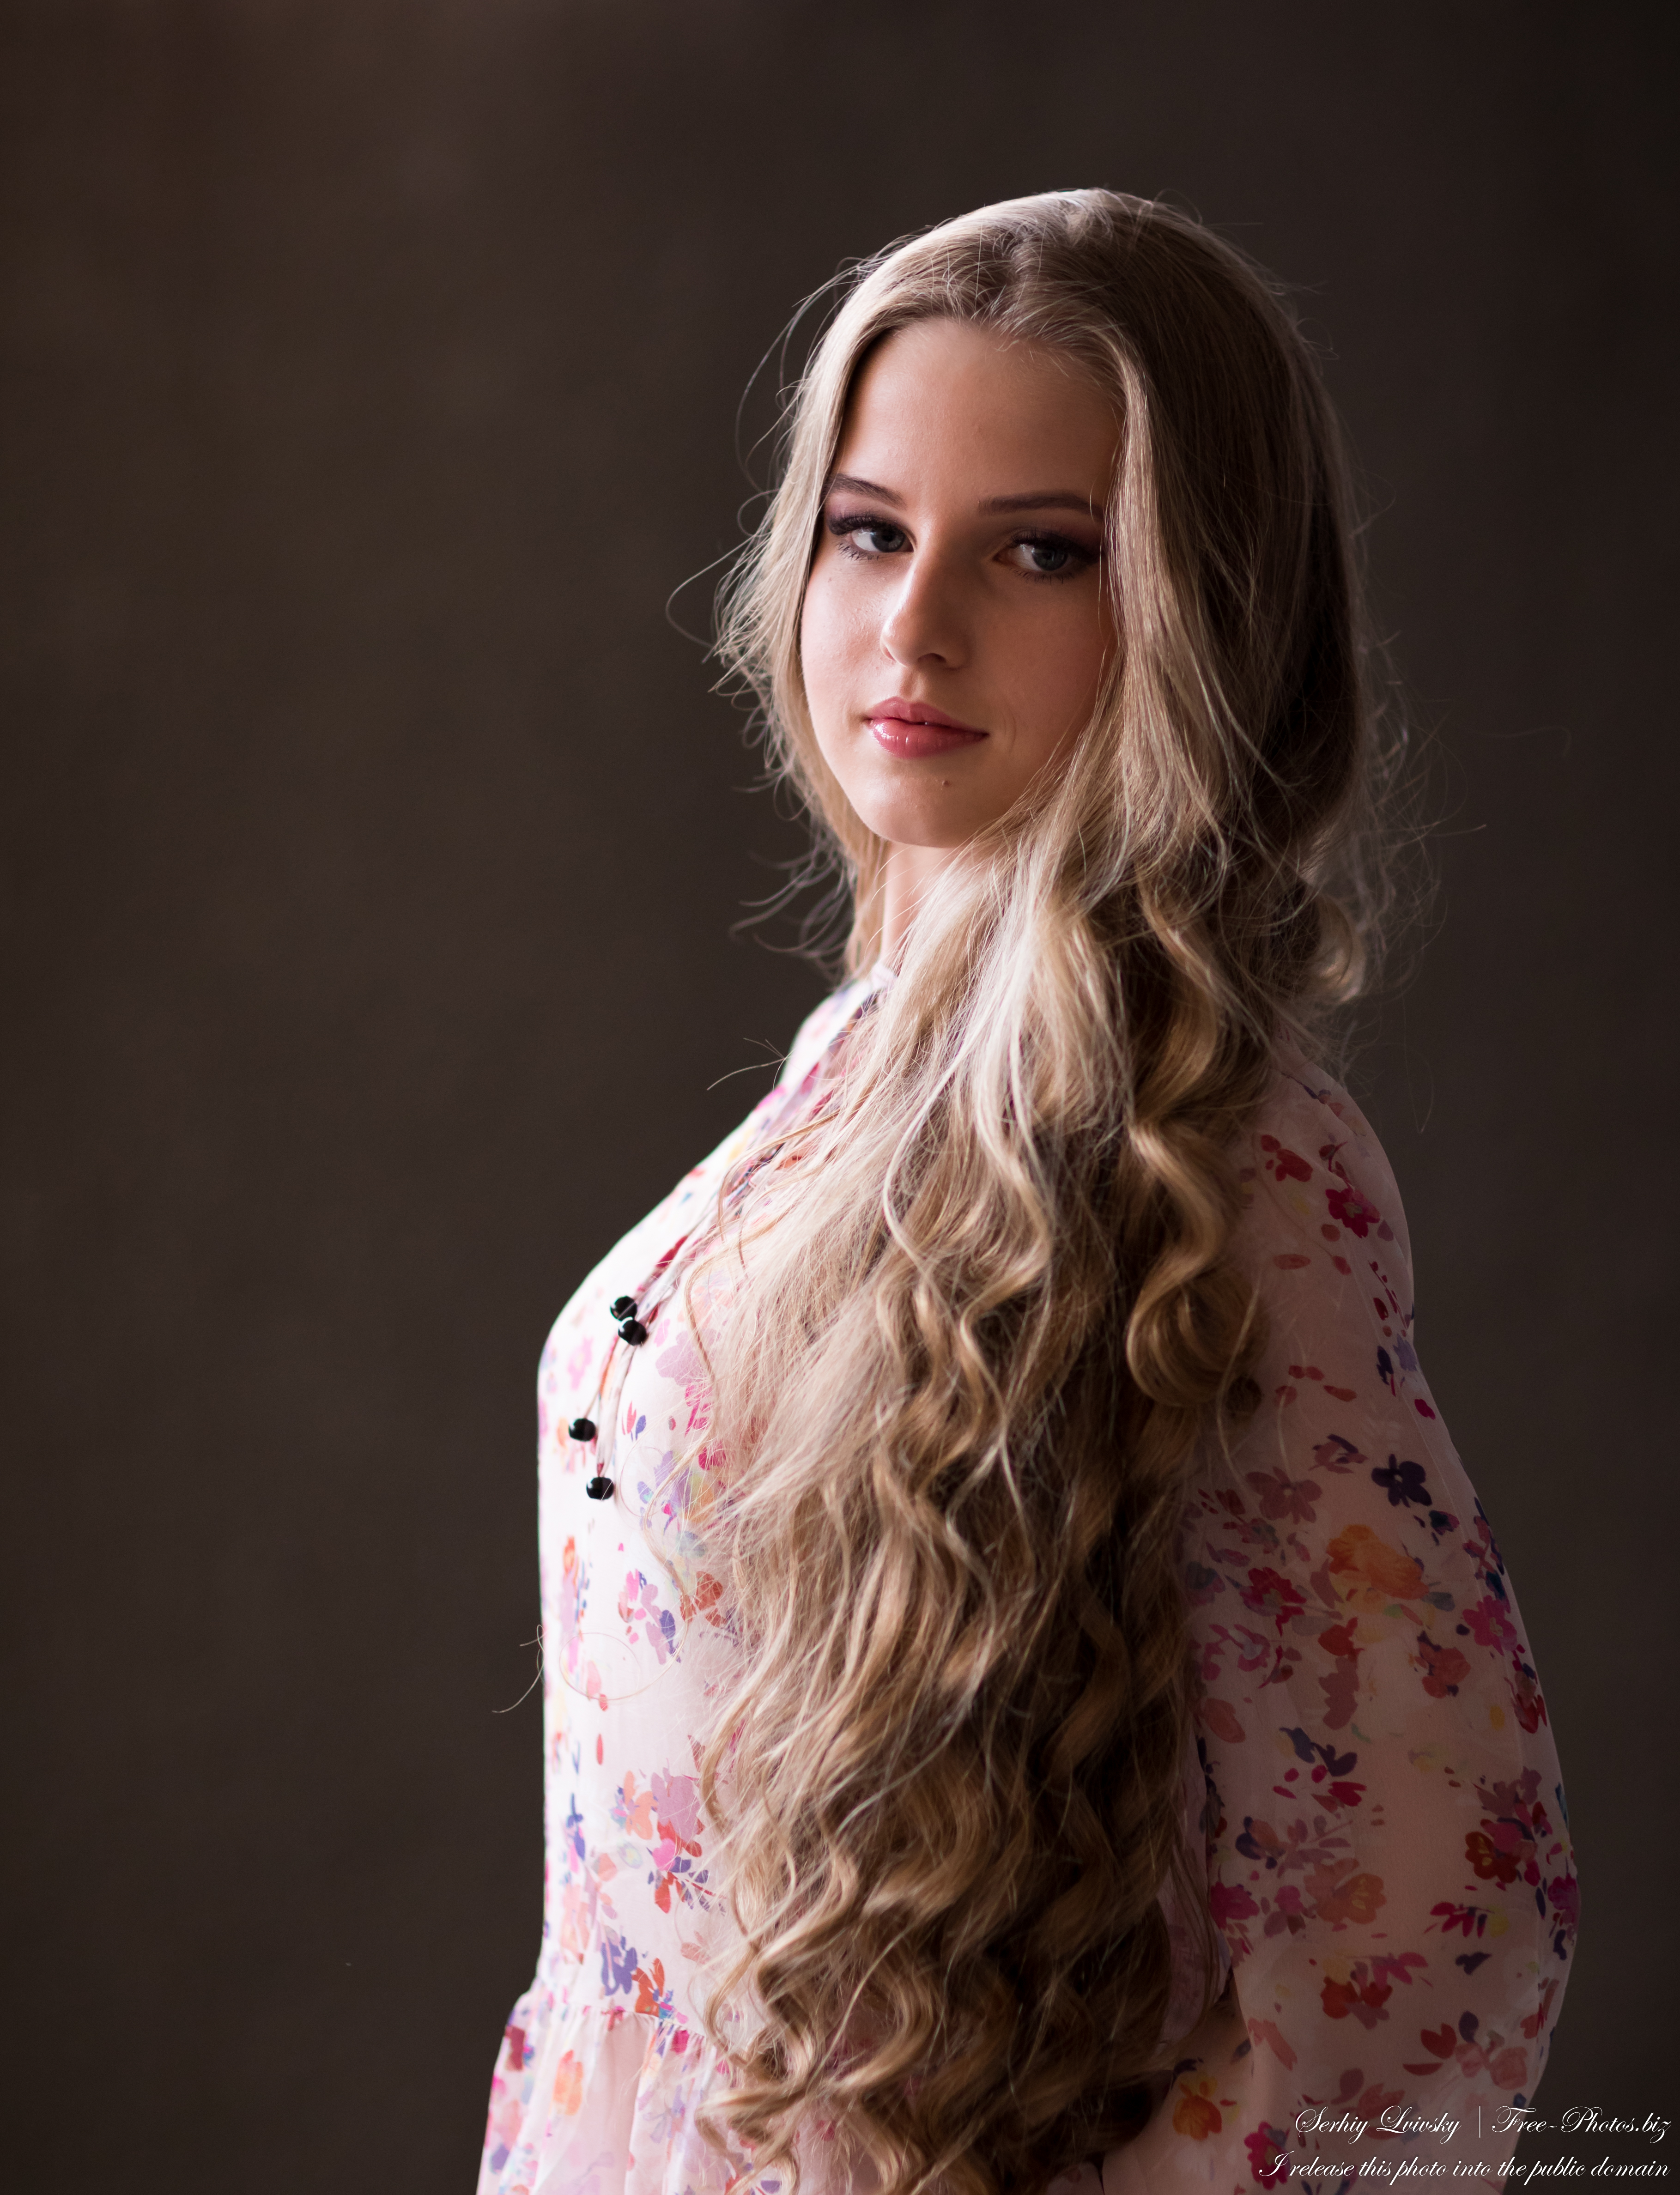 Diana - an 18-year-old natural blonde girl photographed by Serhiy Lvivsky in July 2020, picture 1